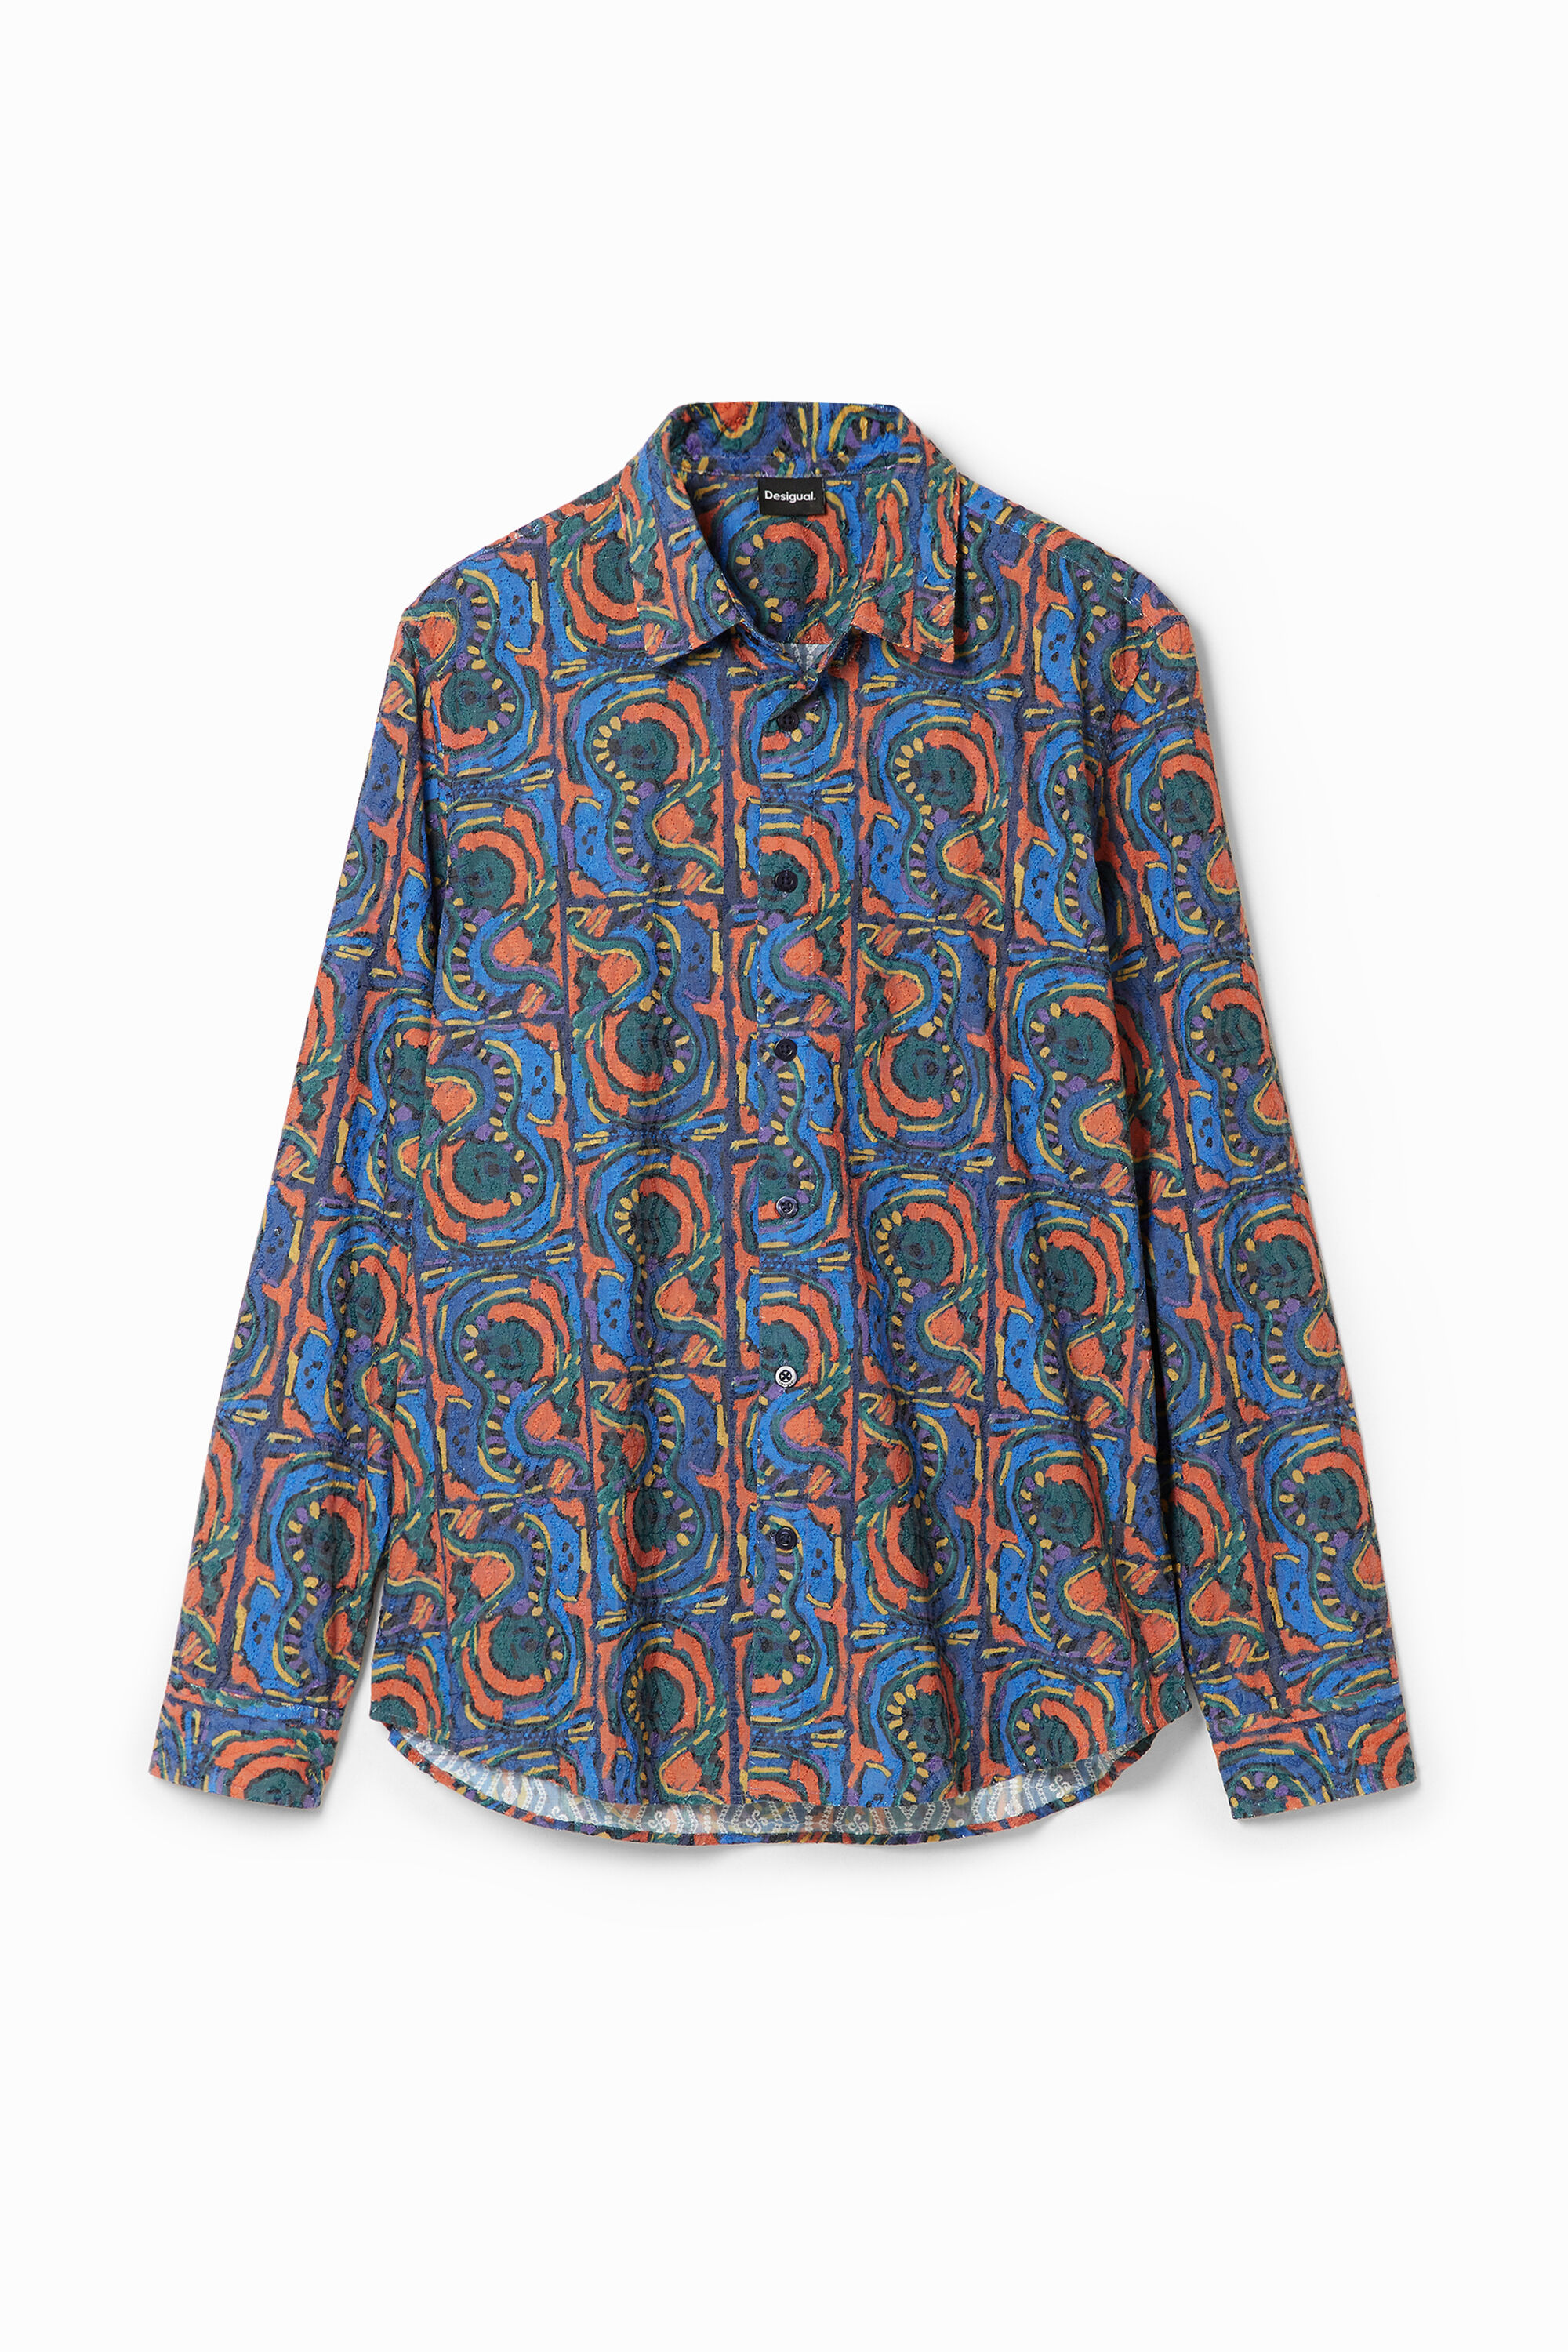 Desigual Arty Embroidered Shirt In Blue